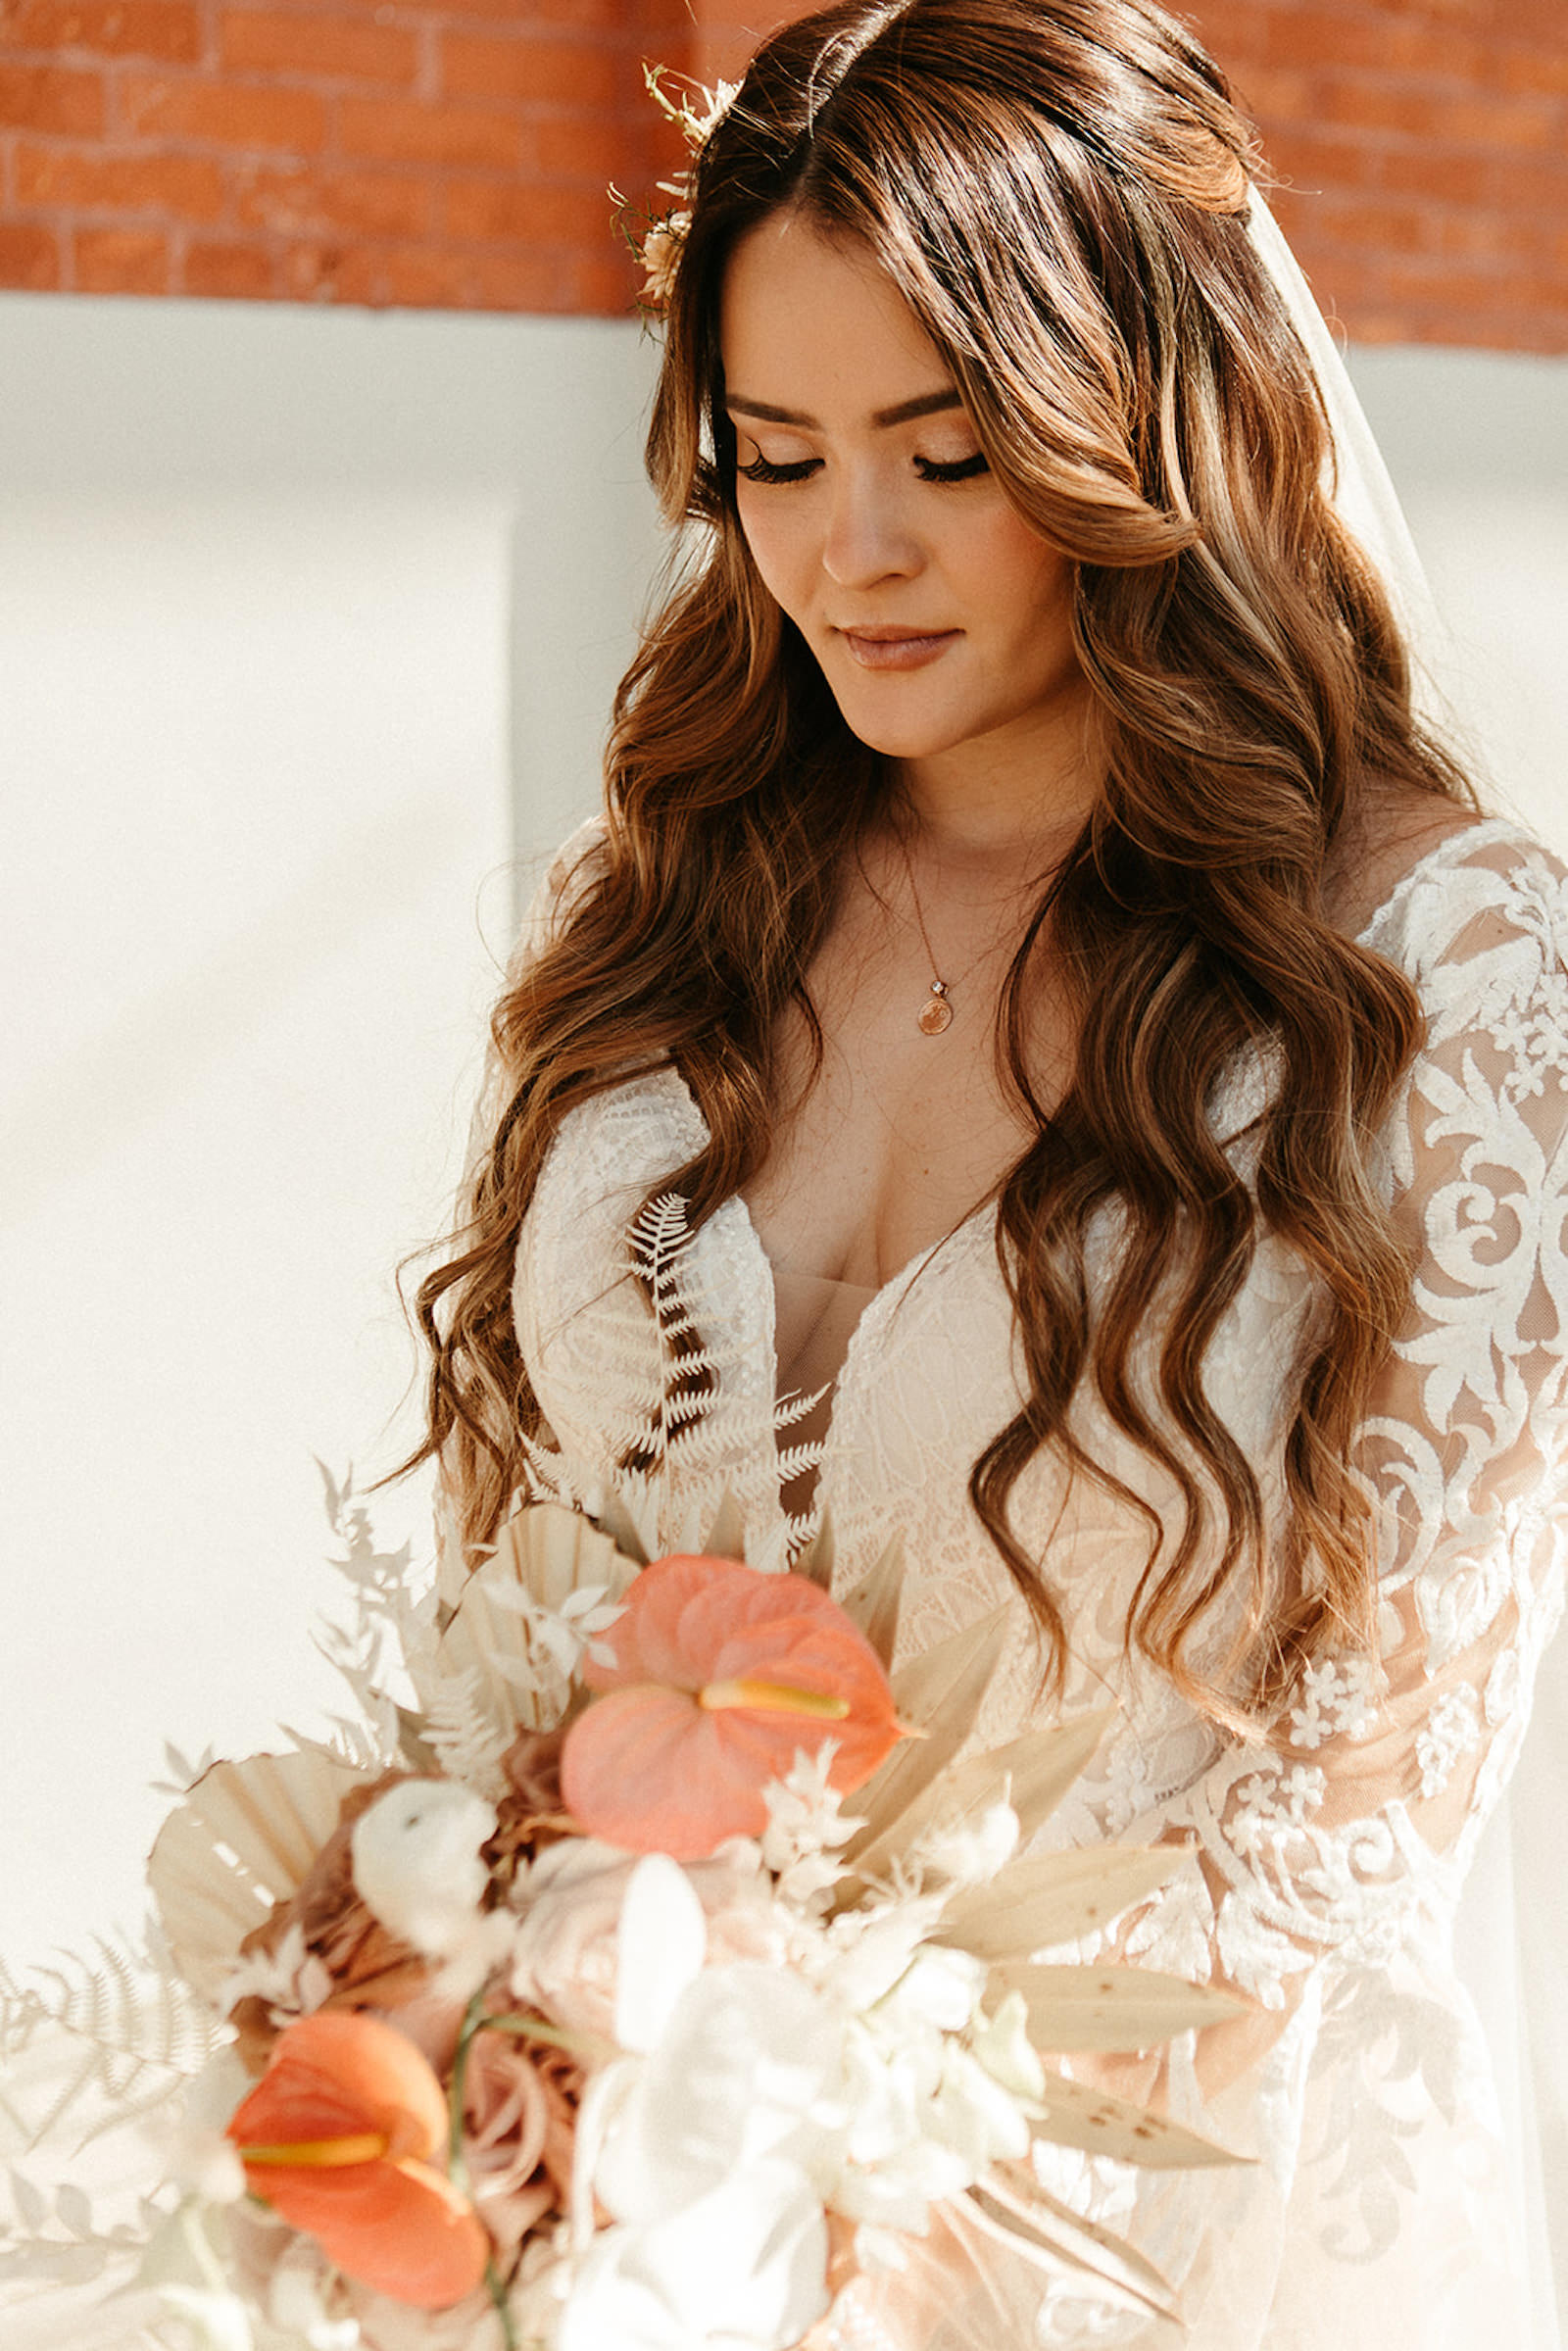 Earthy Neutral Boho Modern Chic Bridal Beauty Portrait Wearing Lace and Illusion Bell Sleeve Wedding Dress Holding White Orchids, Dried Leaves and Pink Anthurium Floral Bouquet | Tampa Bay Wedding Florist Save the Date Florida | Femme Akoi Beauty Studio